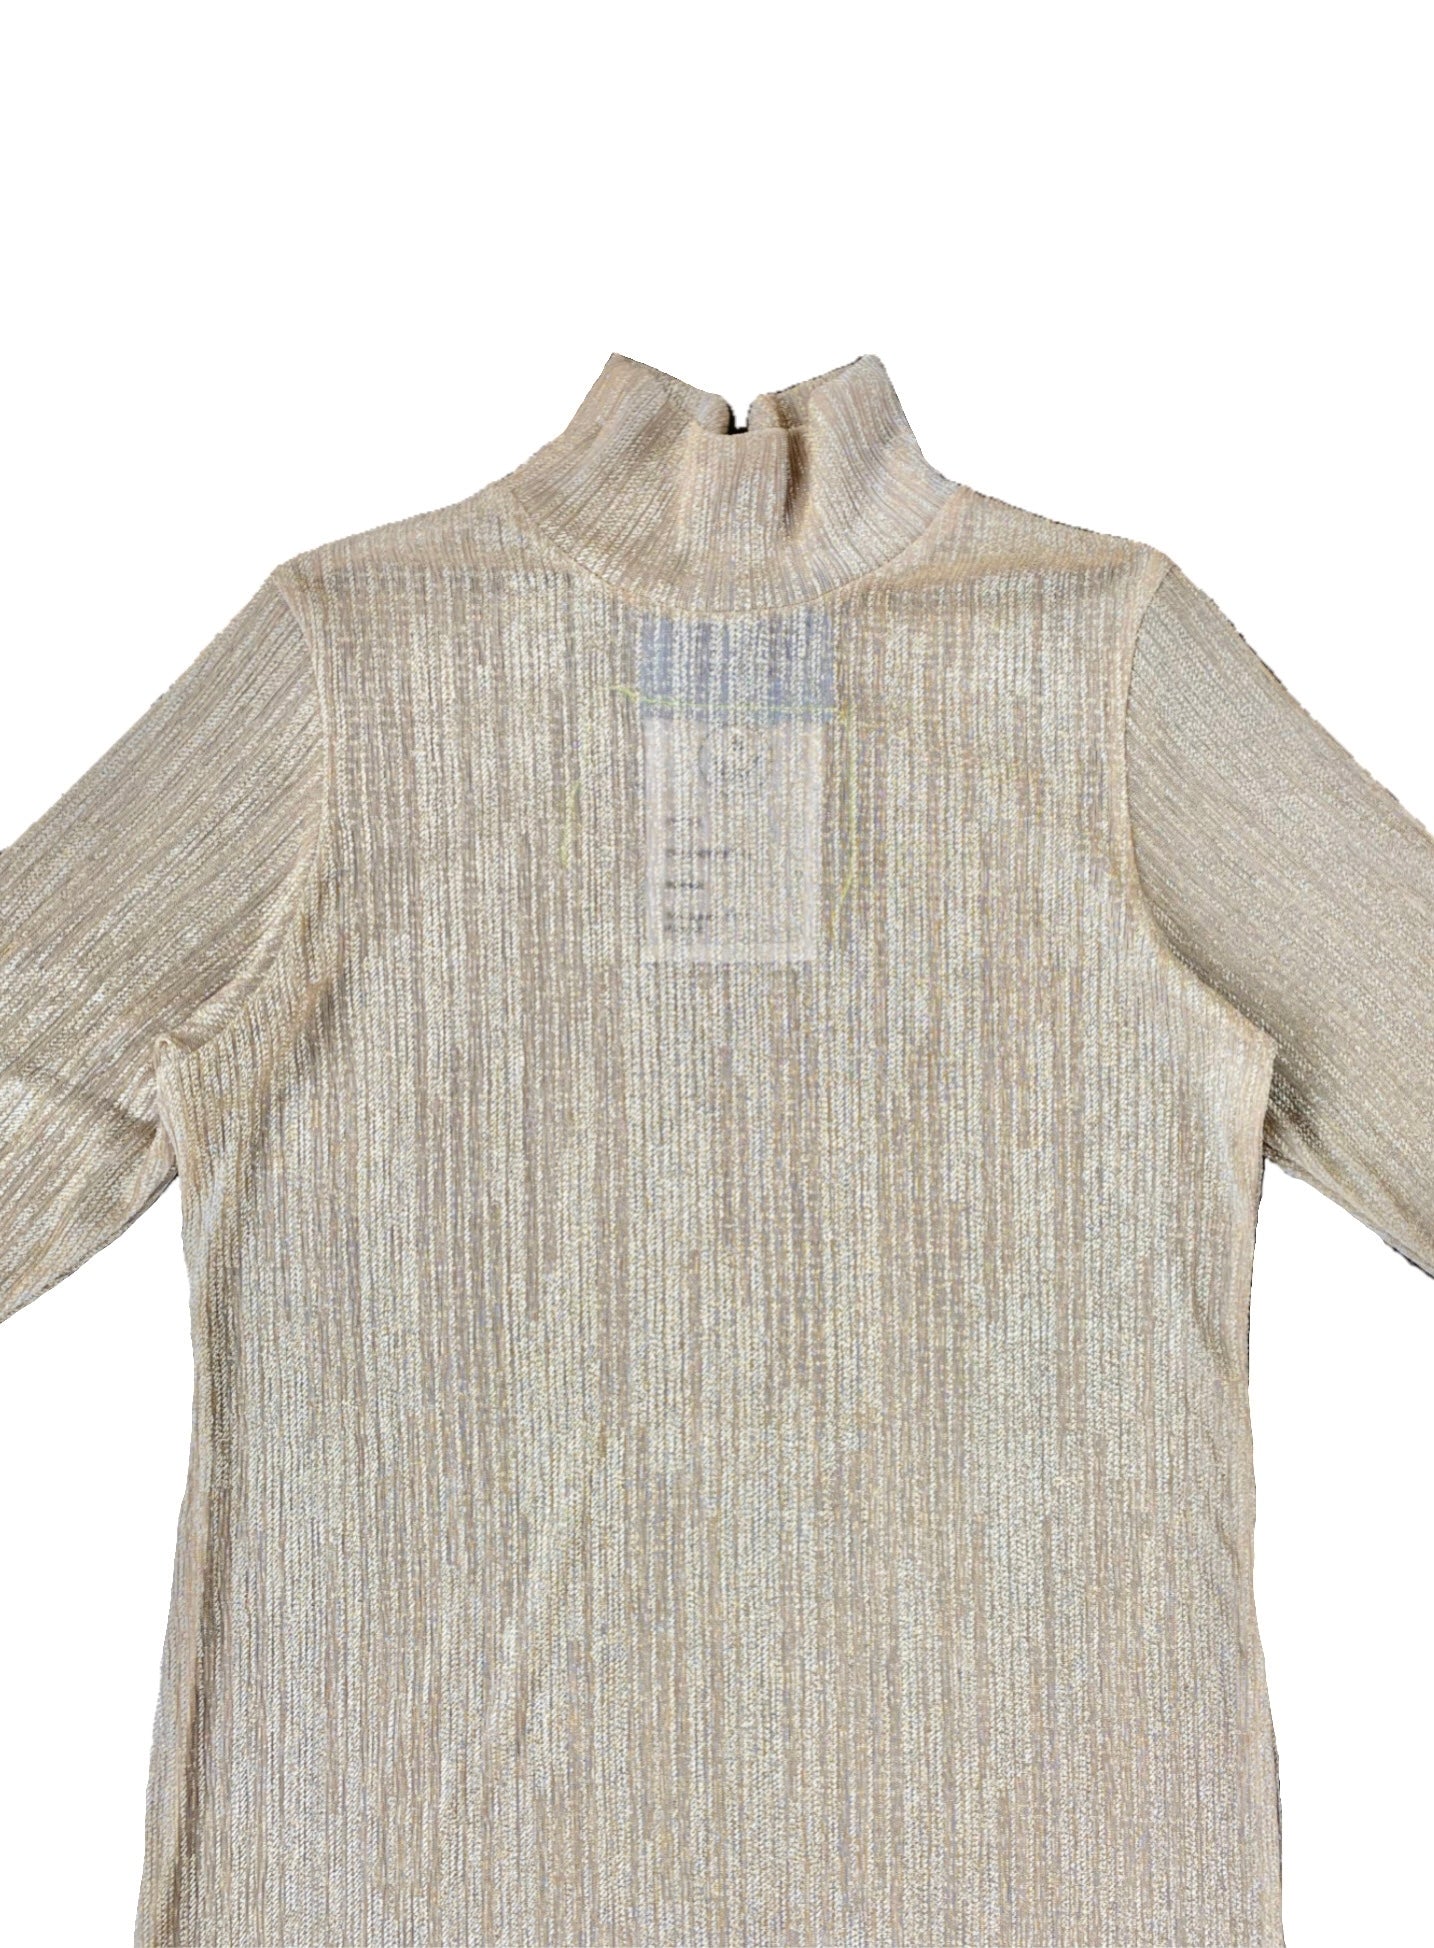 Shimmery Gold & Beige Poloneck Top